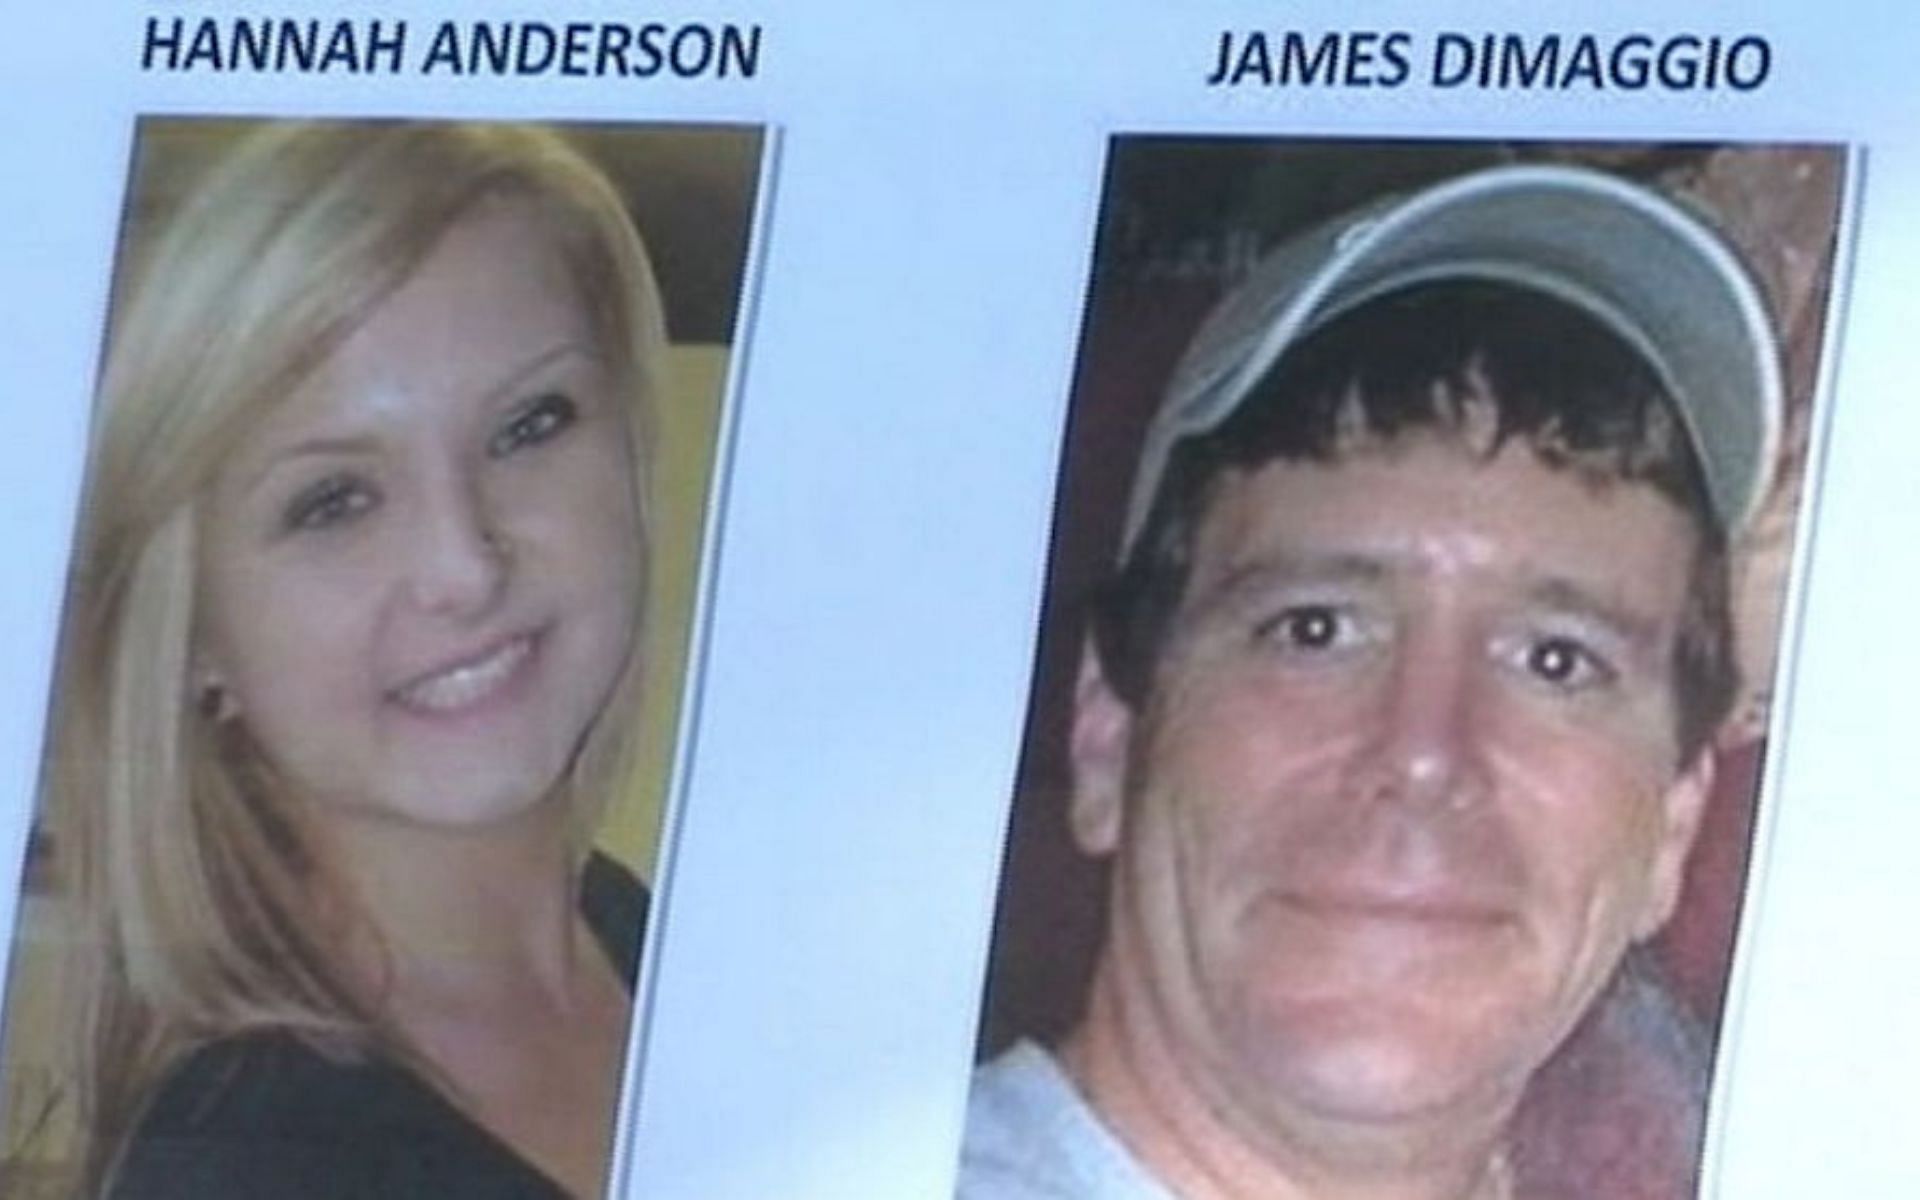 The Amber alert helped investigators in the rescue mission (Image via ABC)